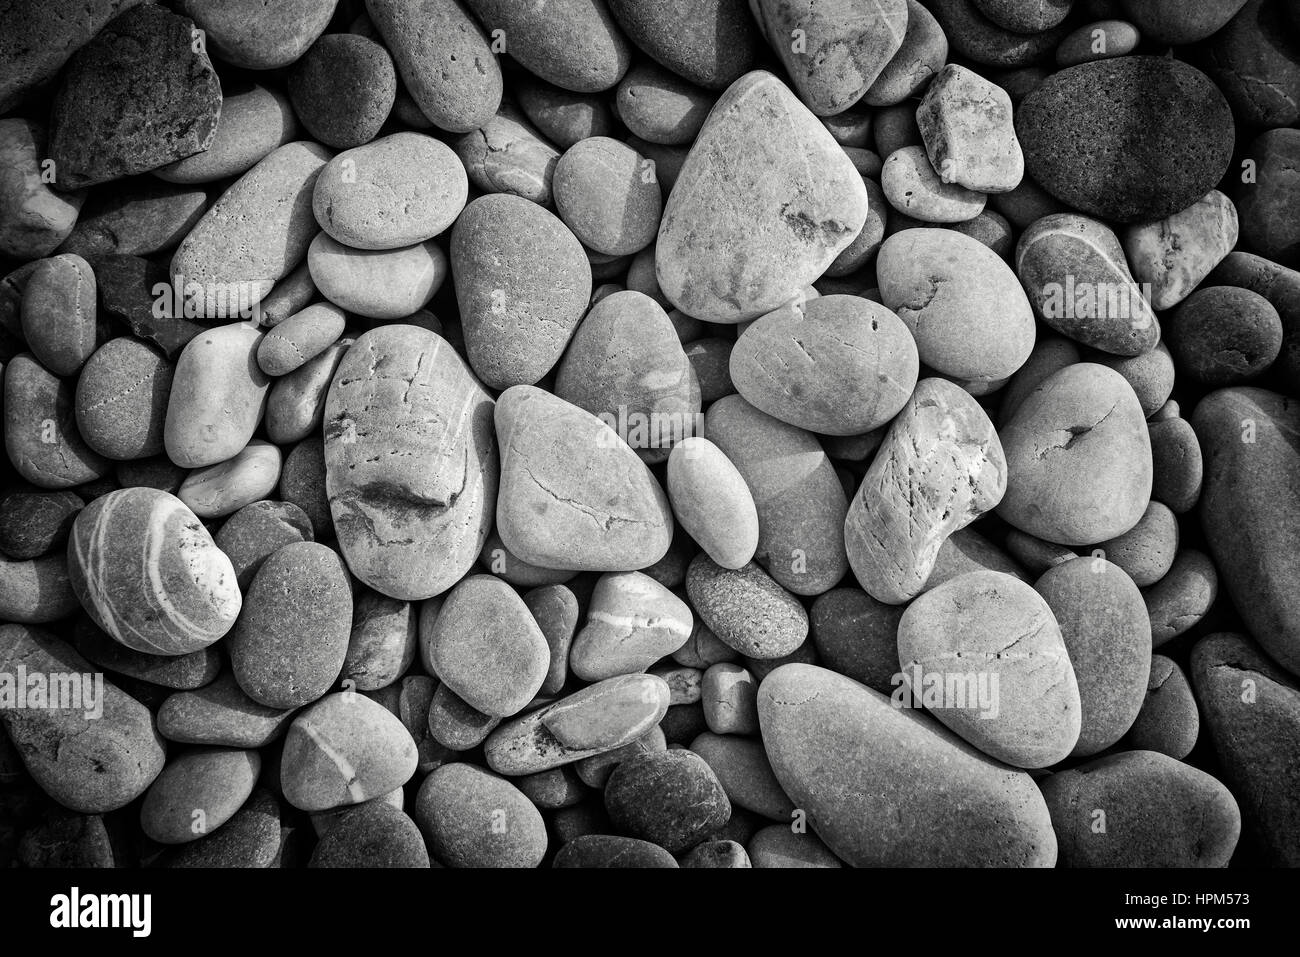 Fishguard, Wales - Vignette of smooth pebbles on a beach in black and white Stock Photo